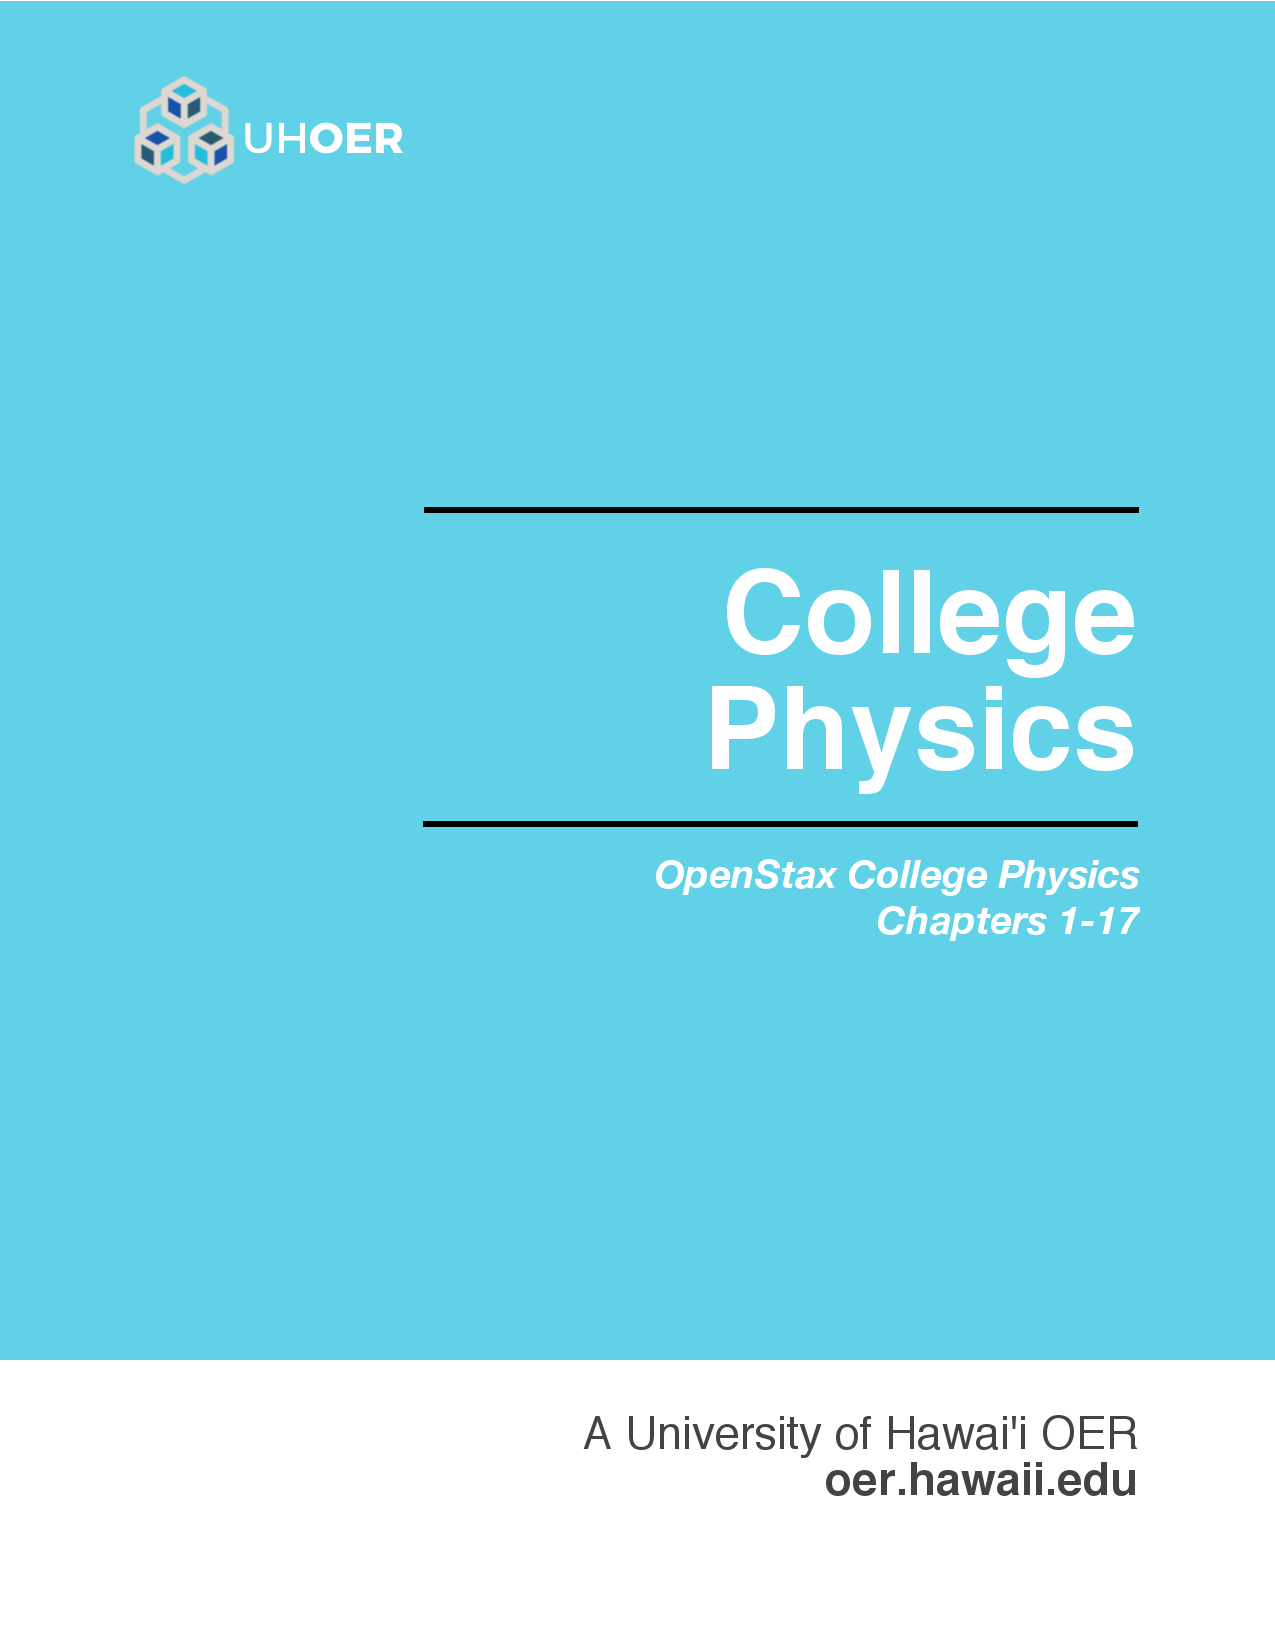 Cover image for College Physics chapters 1-17